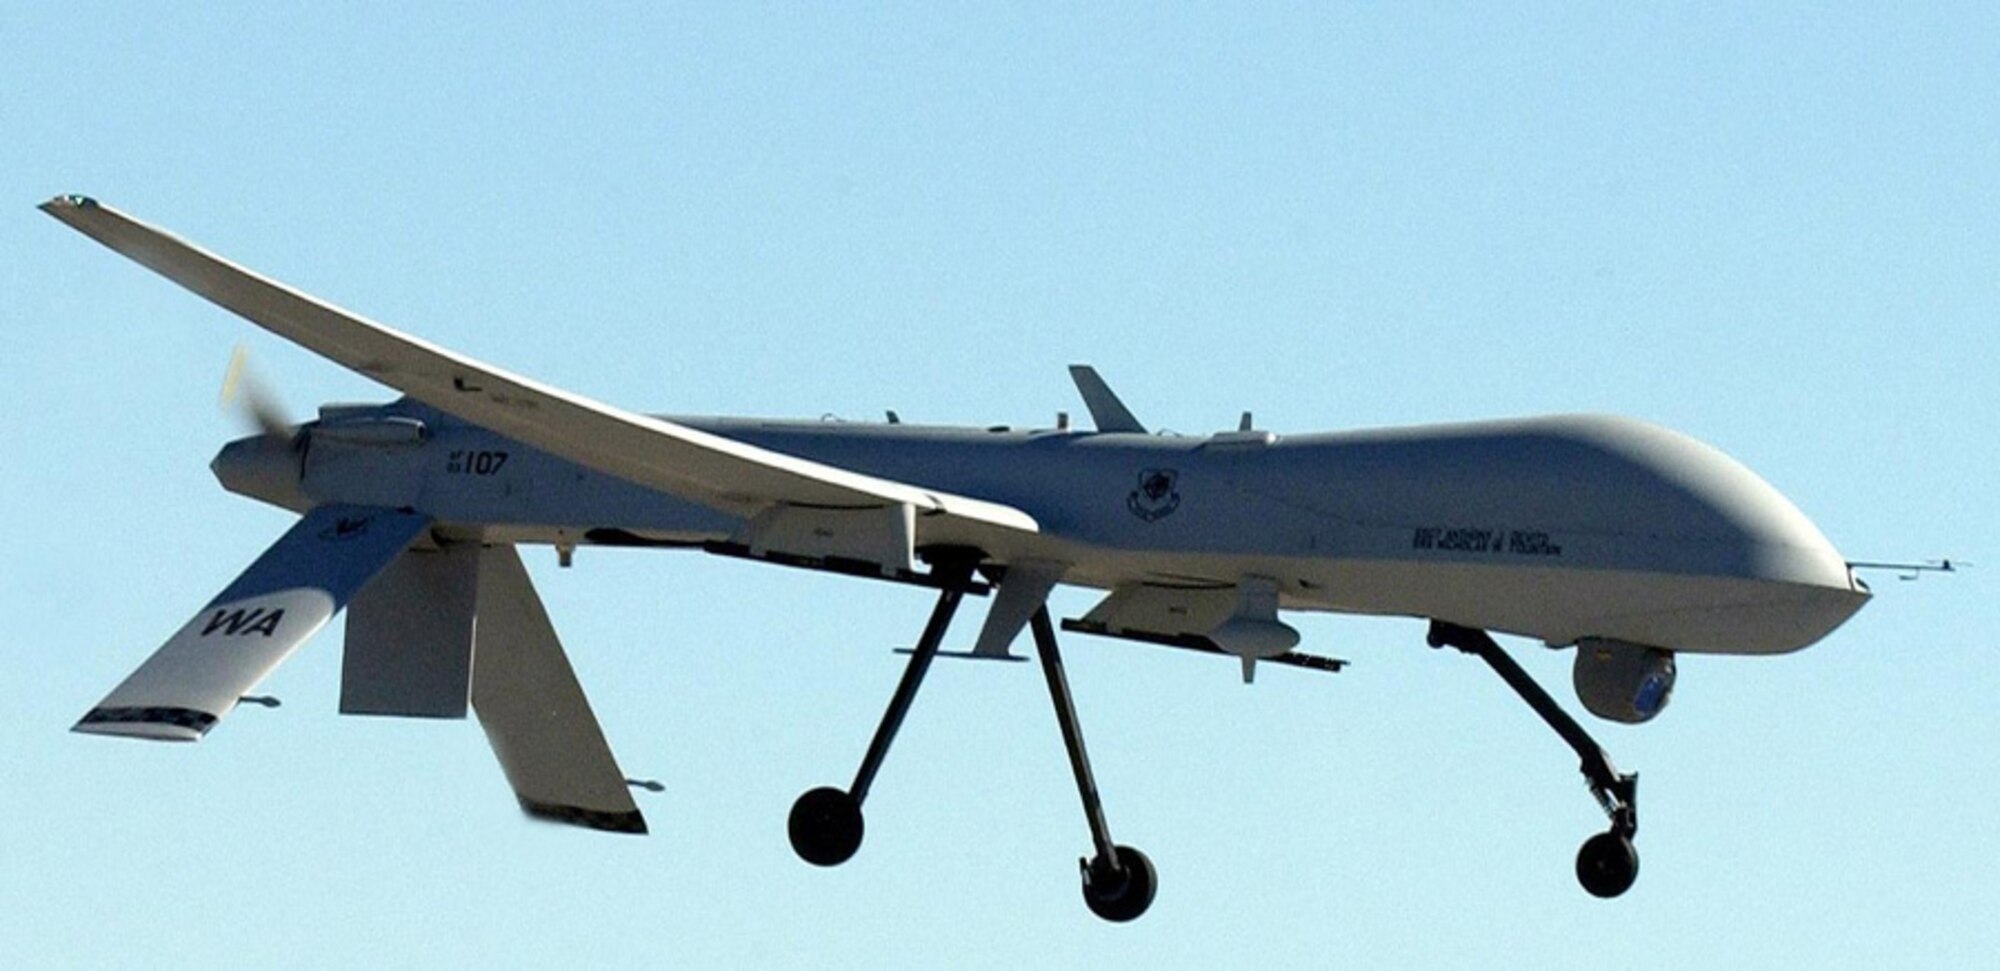 The MQ-1 Predator provides intelligence, surveillance and reconnaissance to the special operators in the field, giving them an advantage over the opposition. (Courtesy photo)